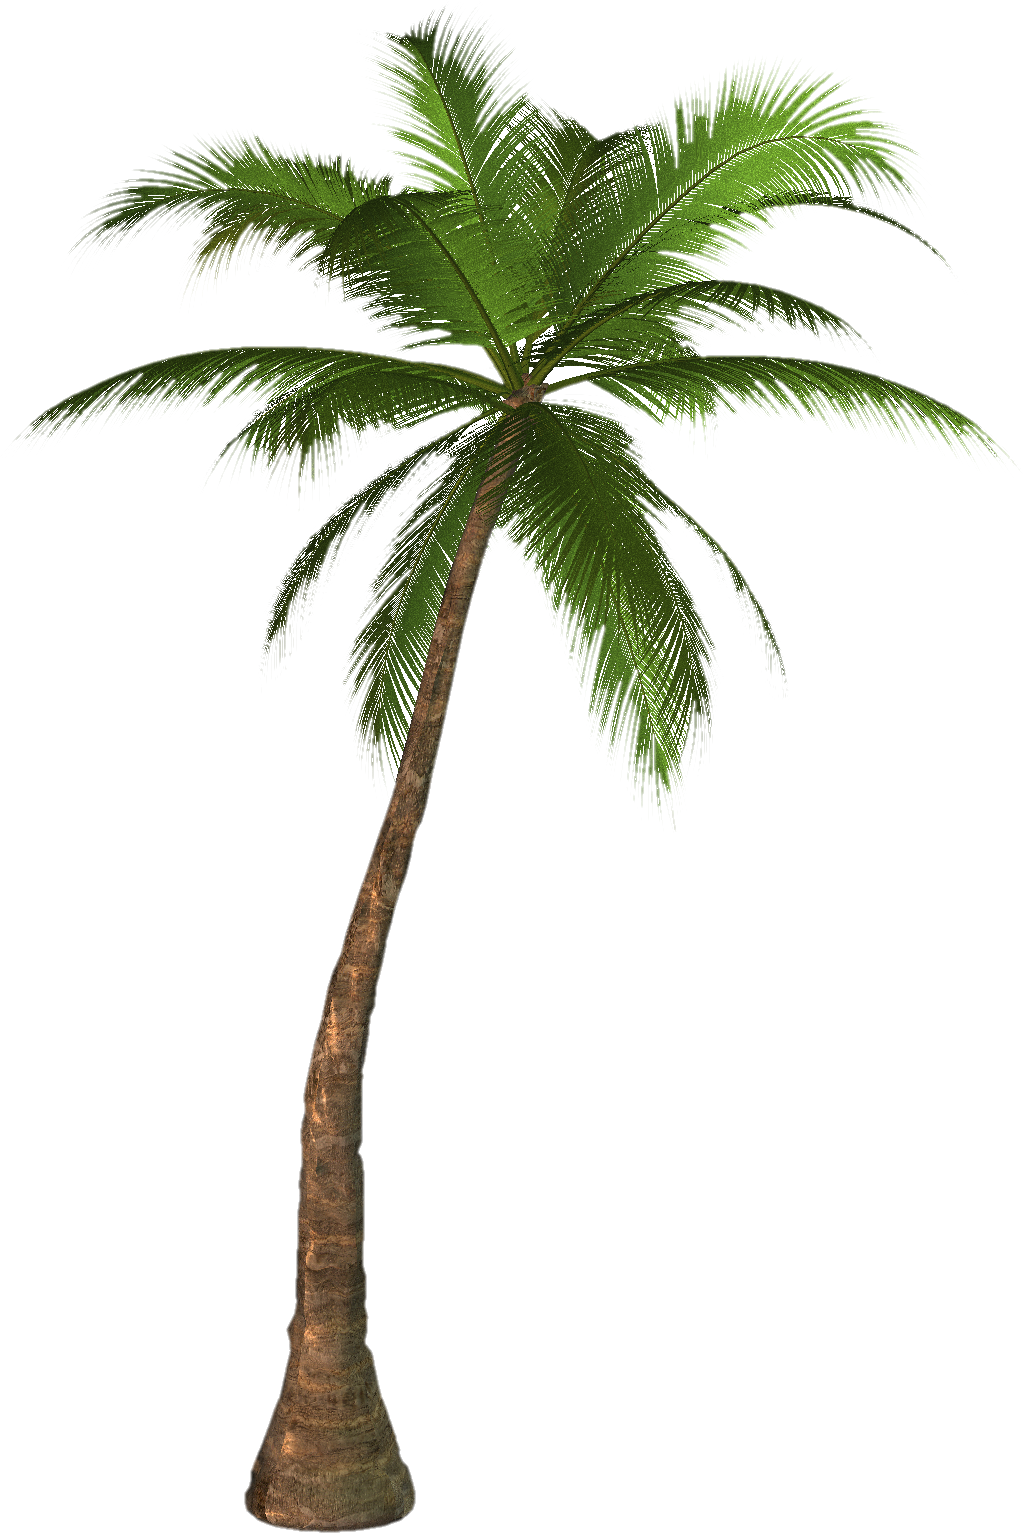 Download PNG image: Palm tree PNG